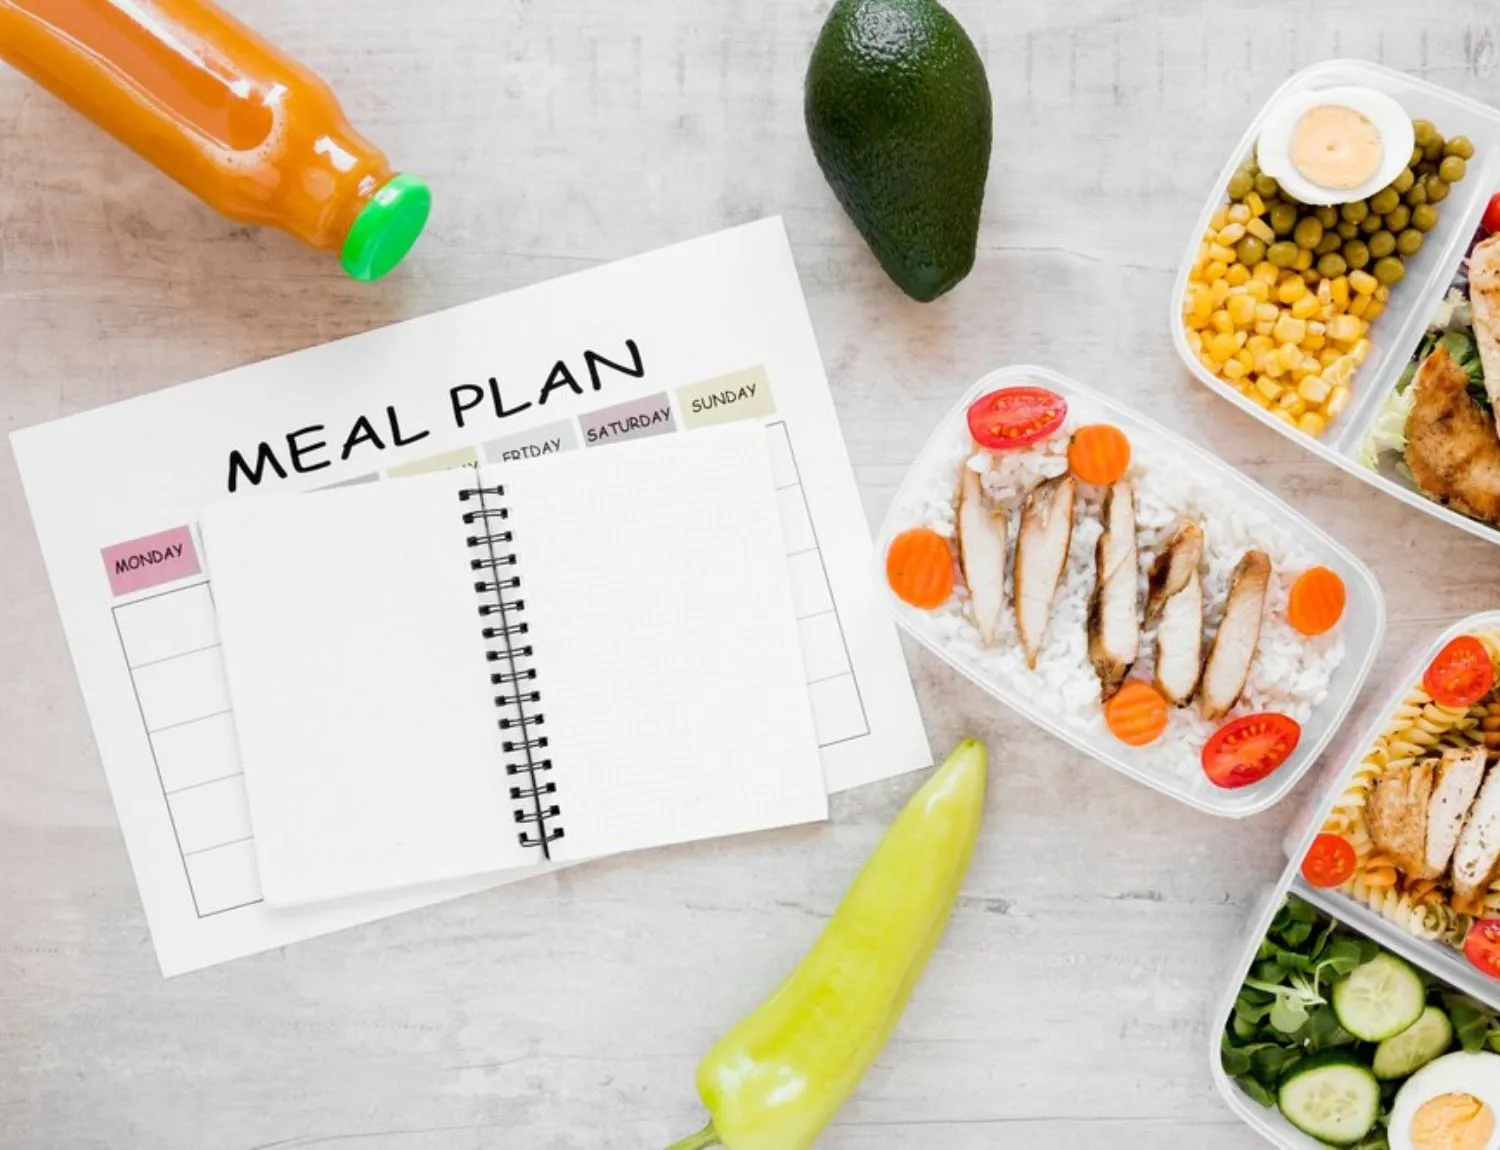 Weight Loss Meal Plan